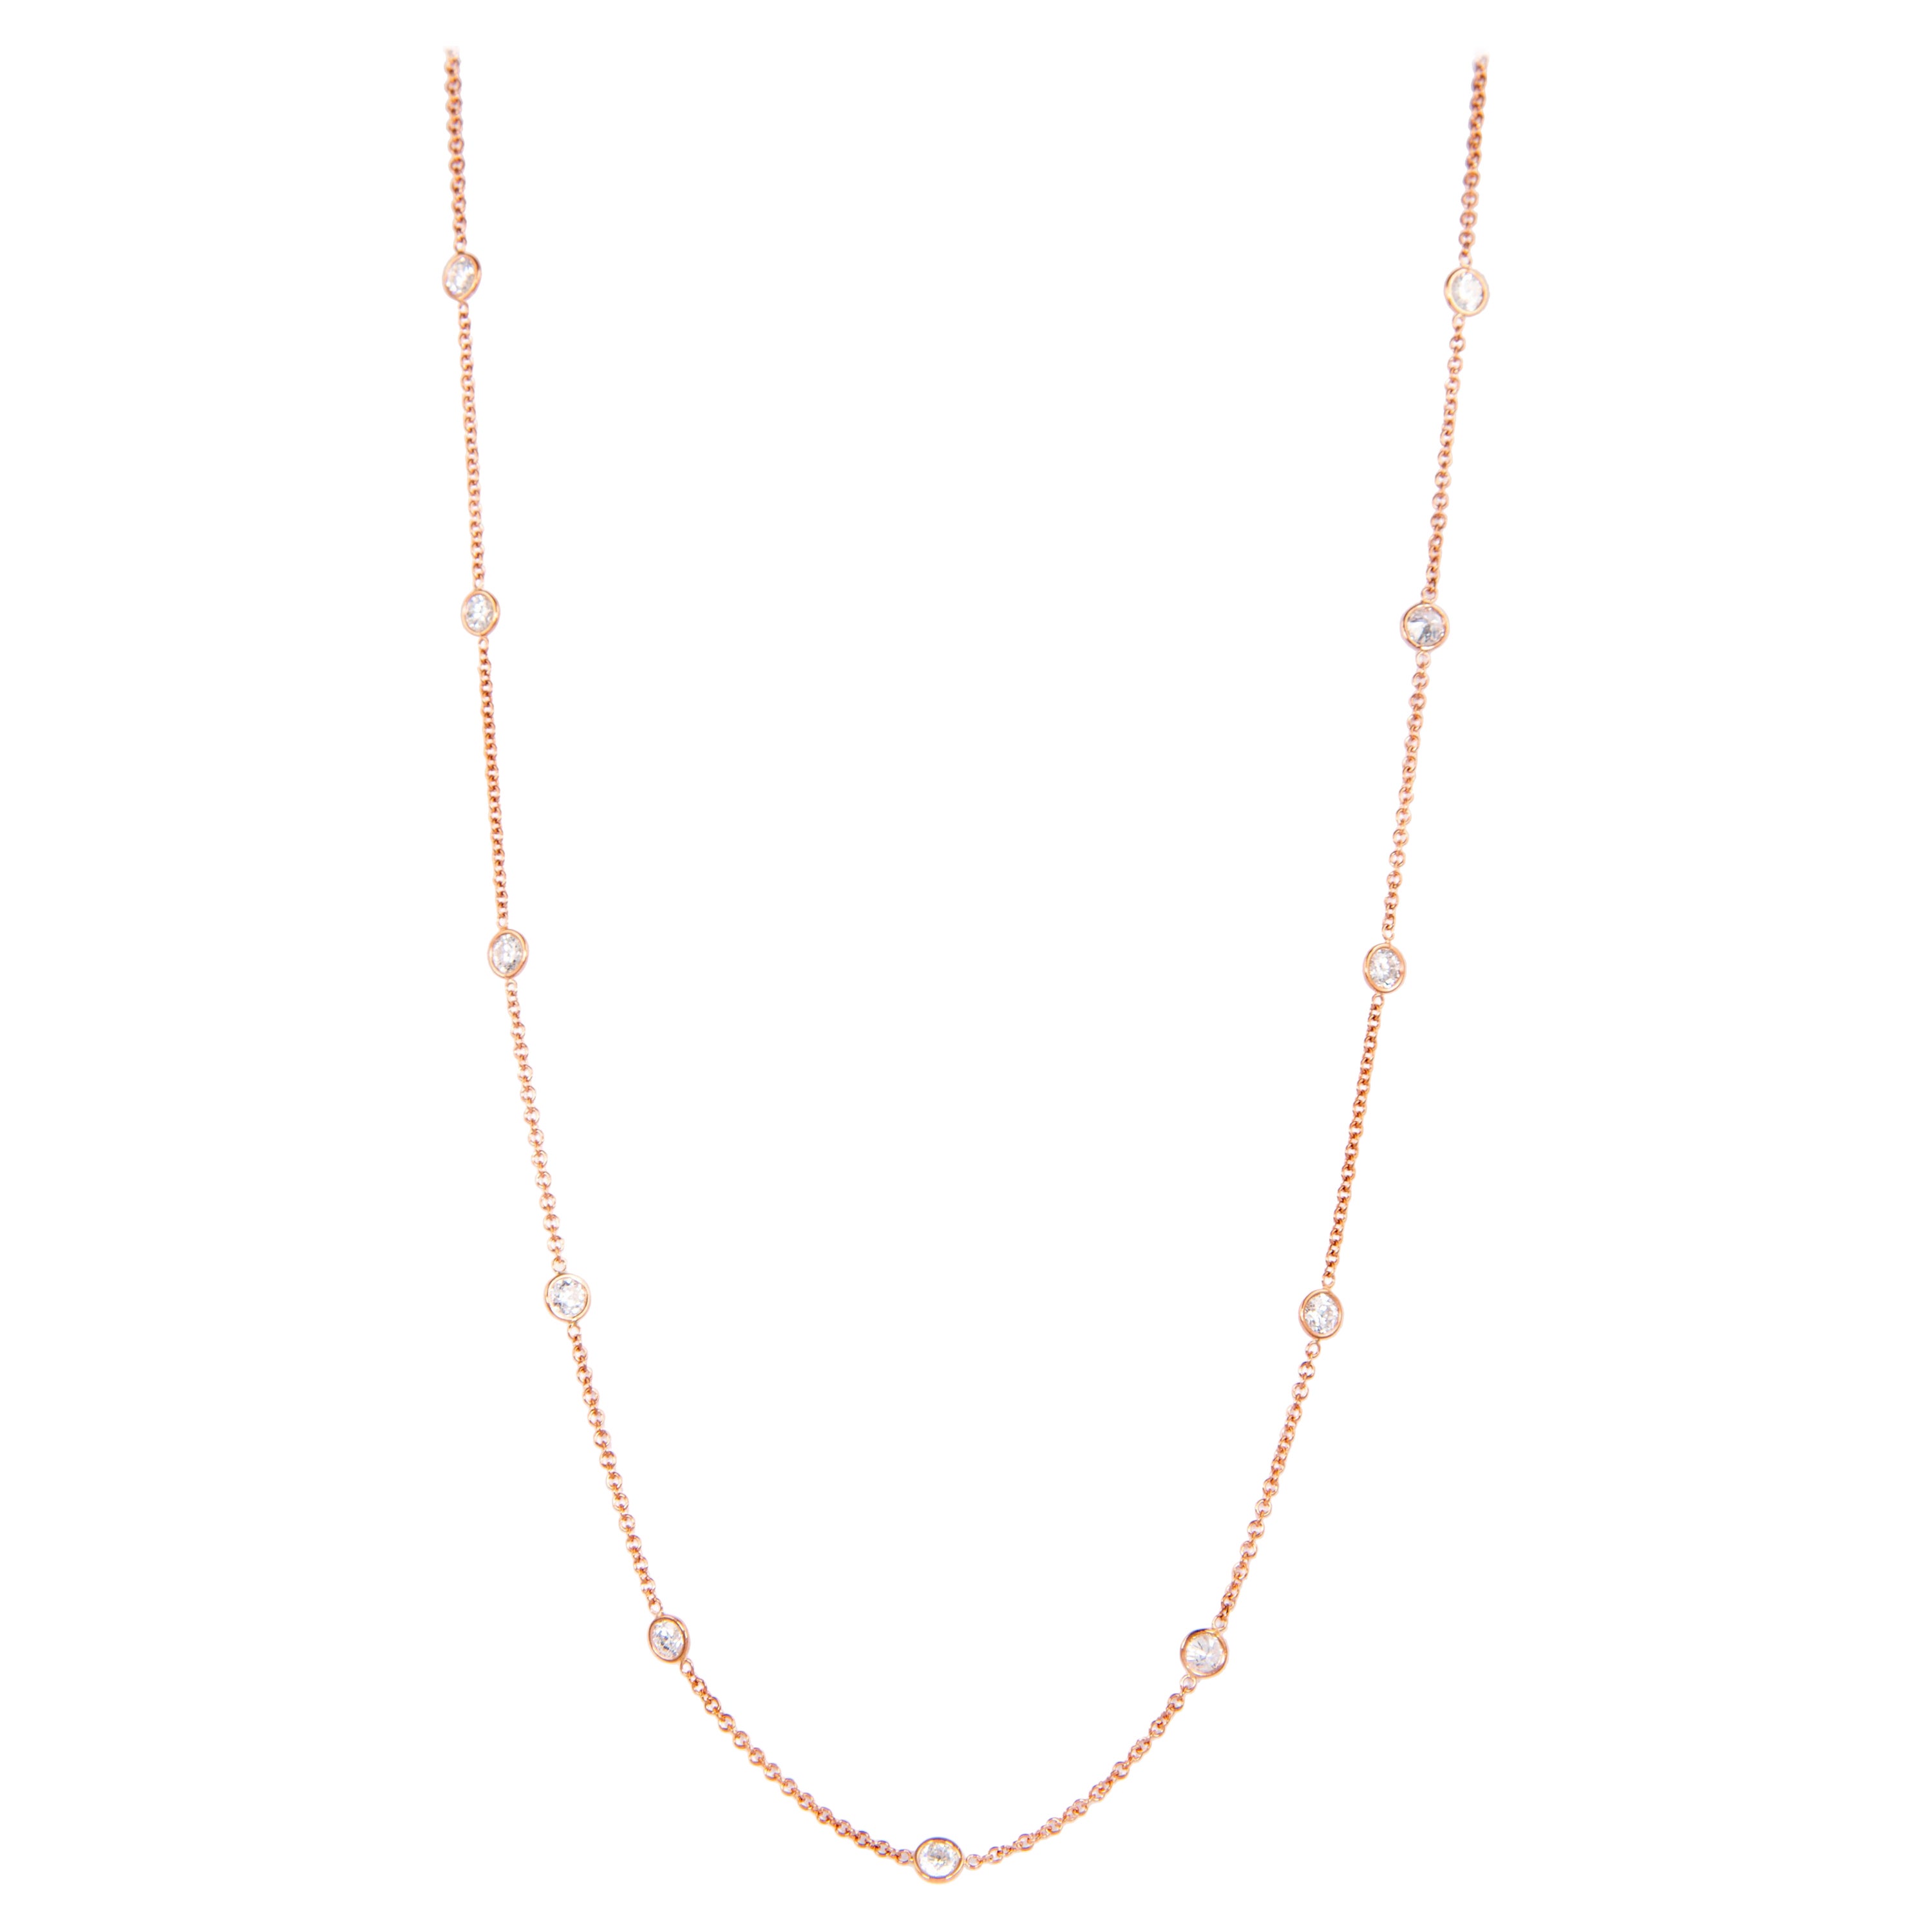 Alexander 4.75ct Diamonds by the Yard Necklace 18 Karat Rose Gold For Sale